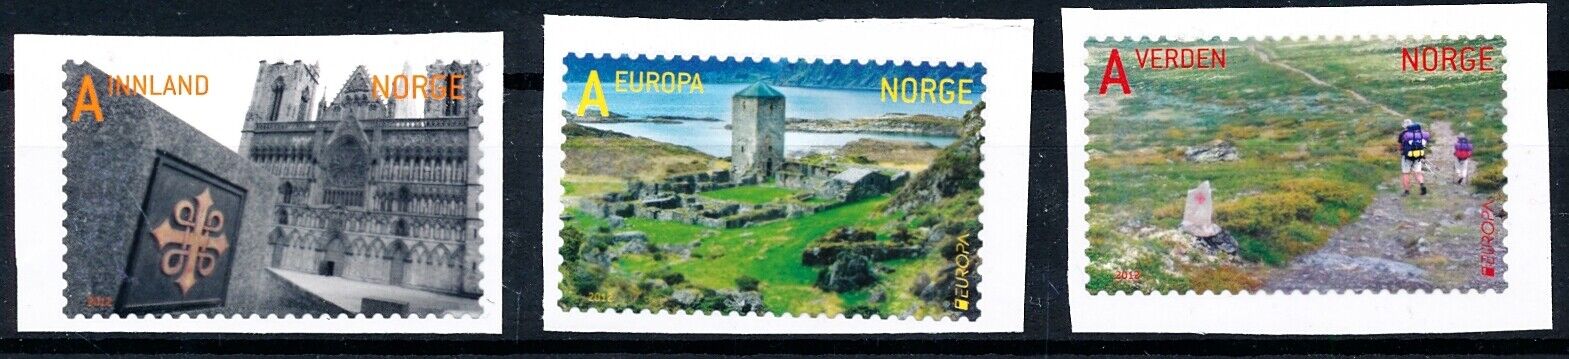 Elegant I1212 Norway 2012 good A surprise price is realized set of very adhesive fine stamps